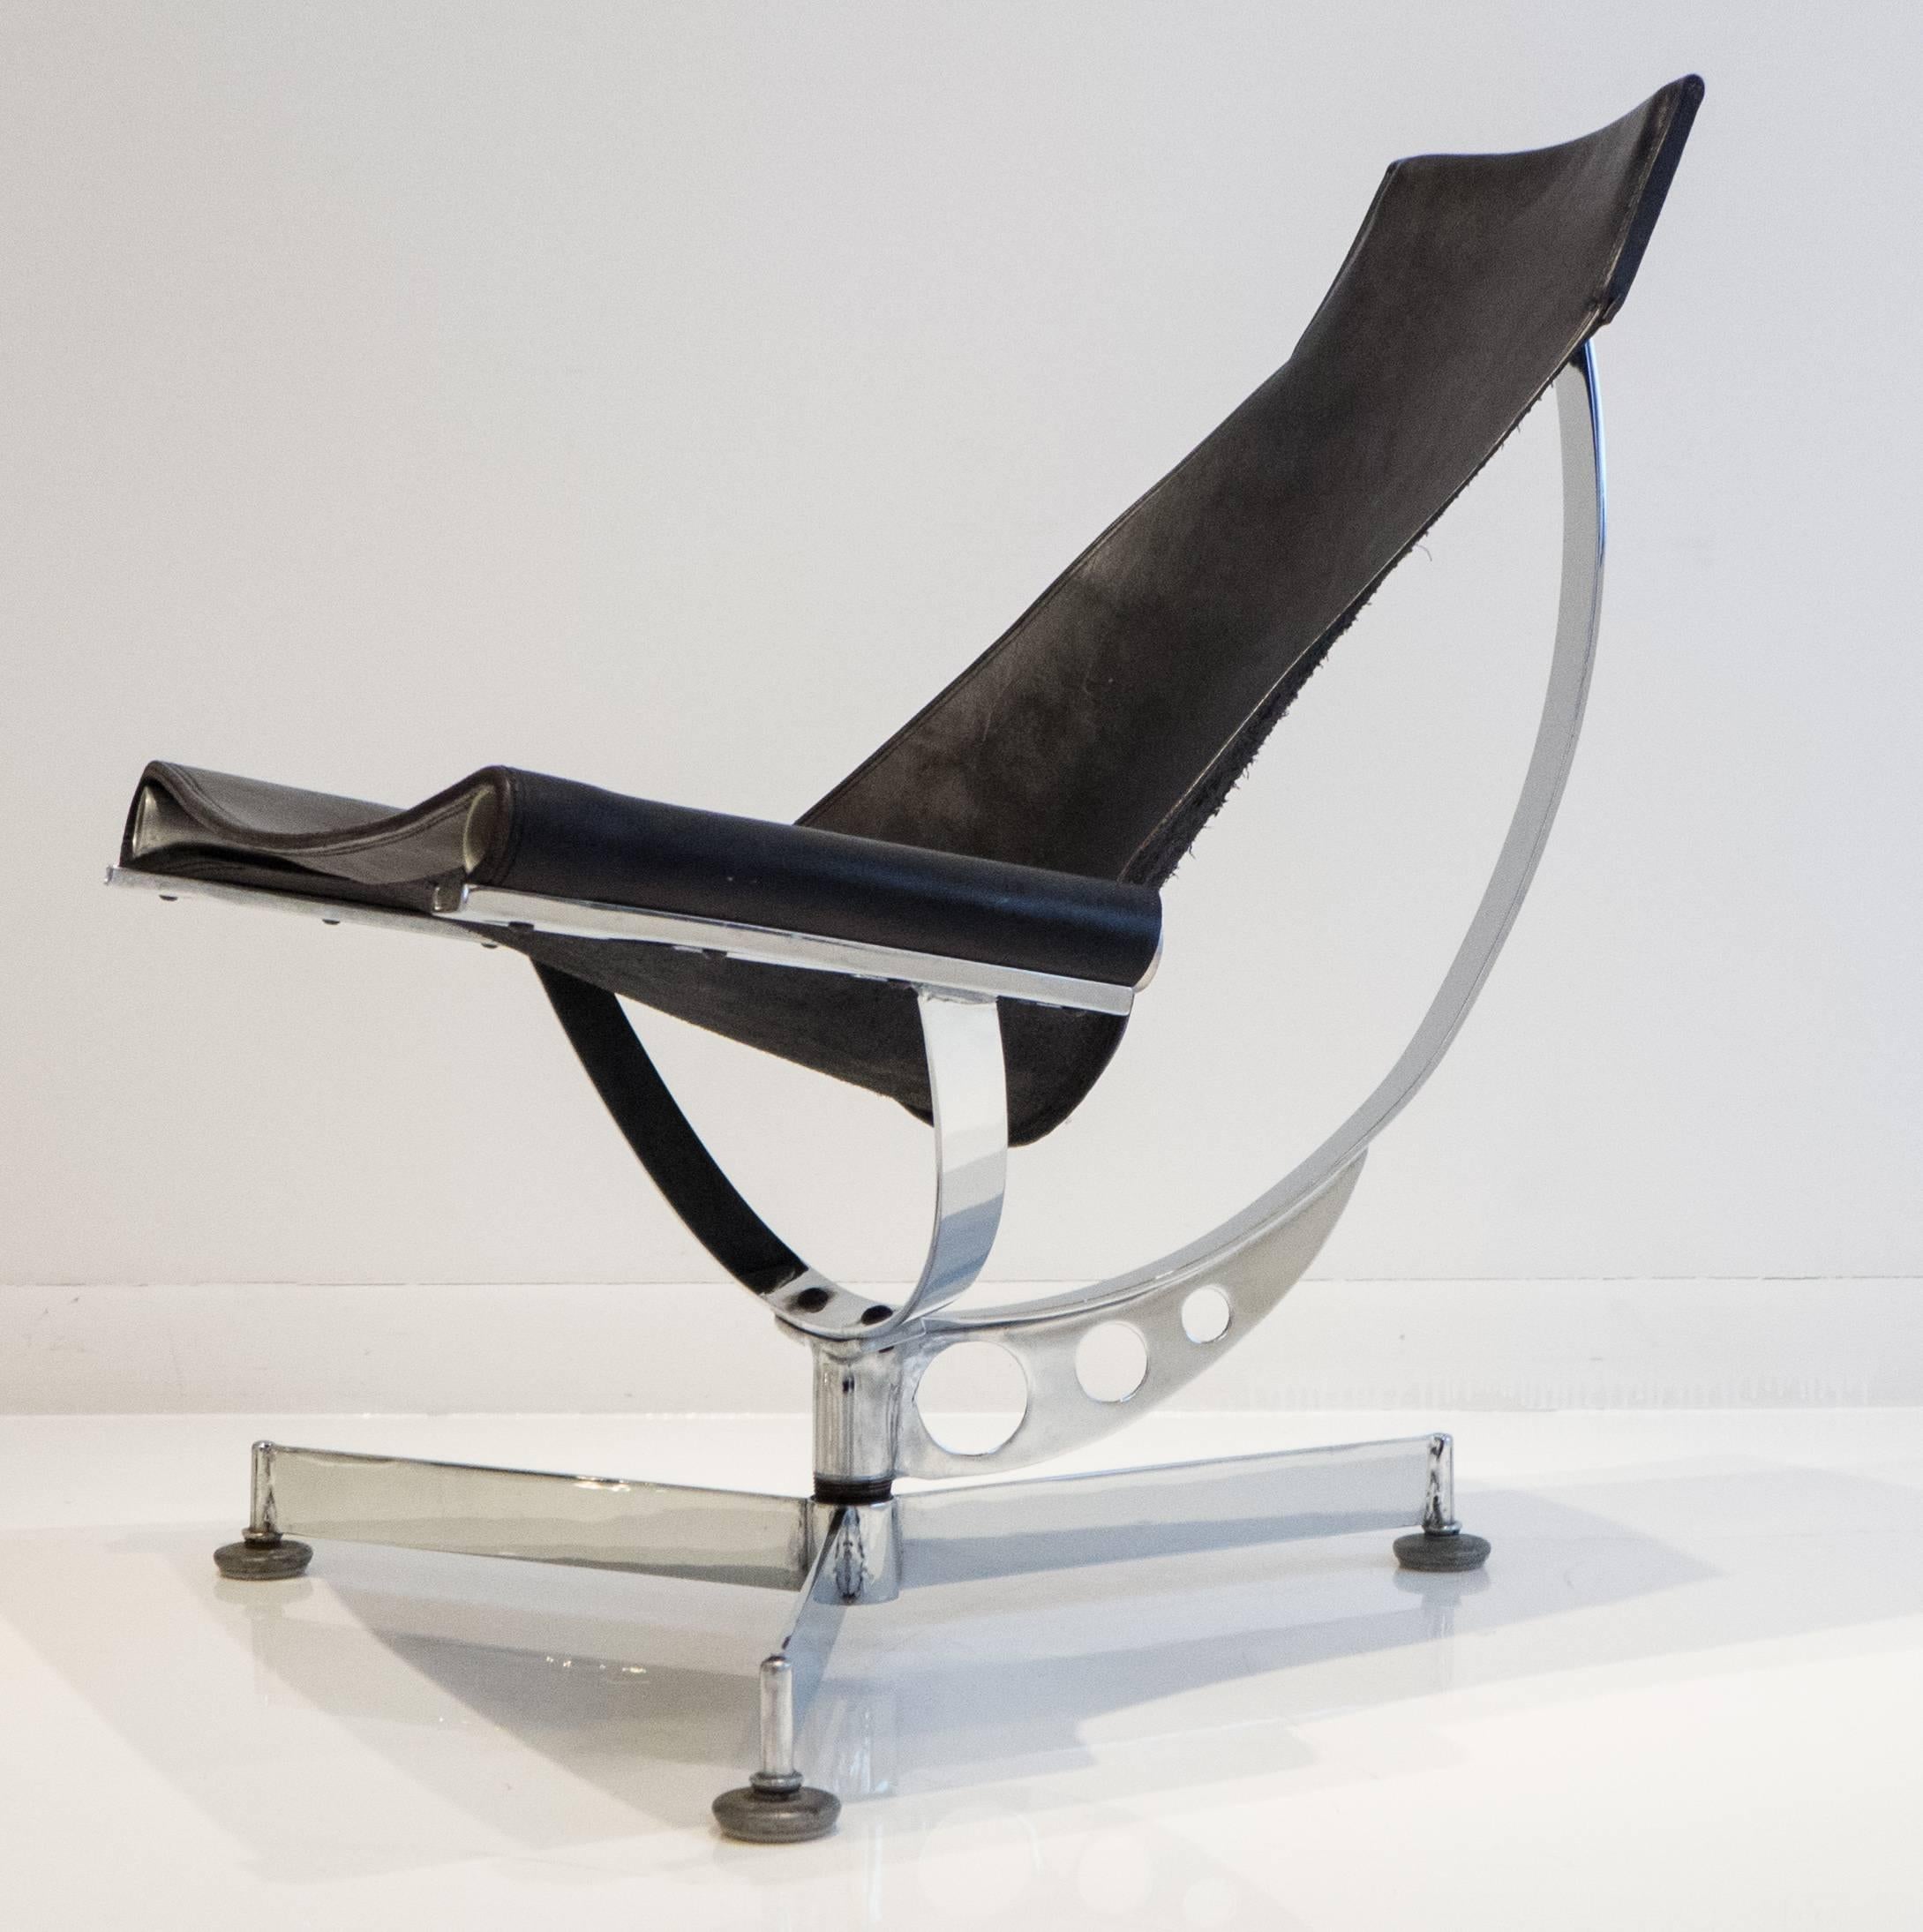 Futuristic-looking sling chair with swooping compound spherical base. By Max Gottschalk, circa 1970s. Uncommon chrome-plated base. The black leather sling has been recently reupholstered.